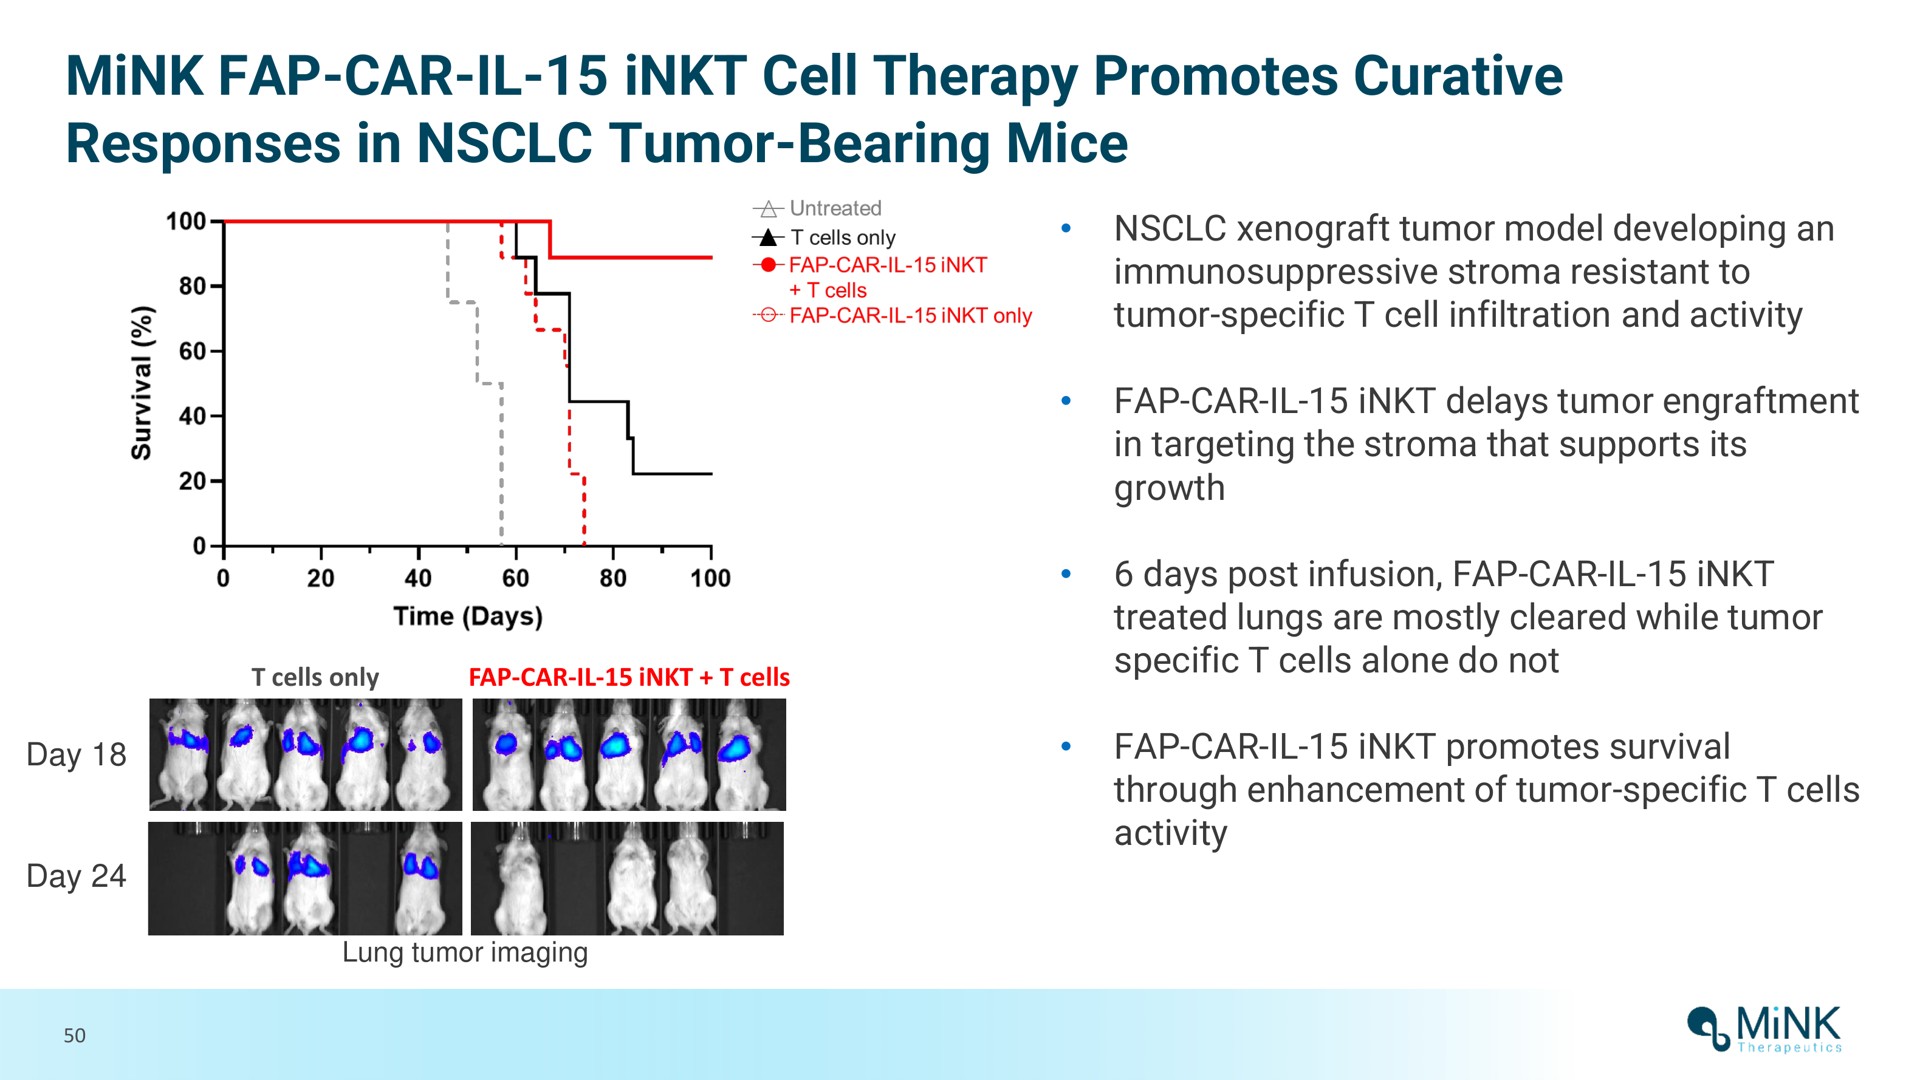 mink car cell therapy promotes curative responses in tumor bearing mice | Mink Therapeutics